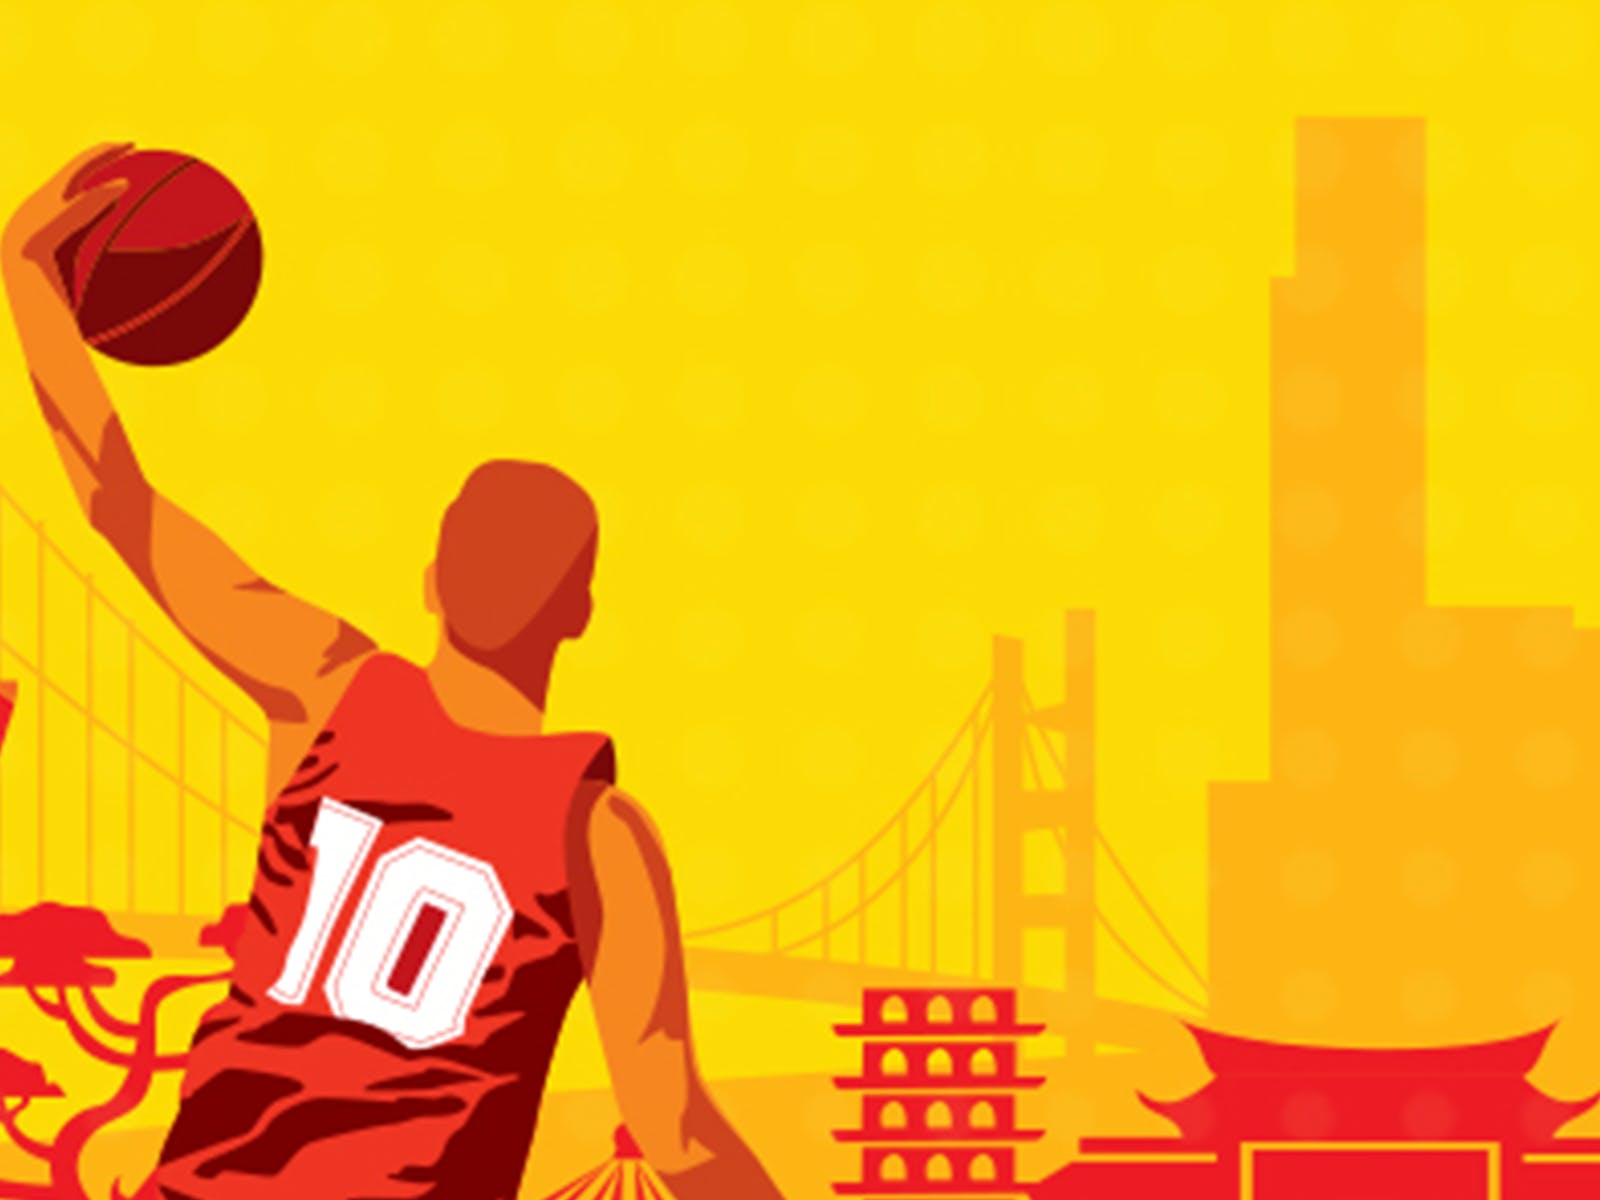 Bay Area Sports Wallpapers 4k, HD Bay Area Sports Backgrounds on